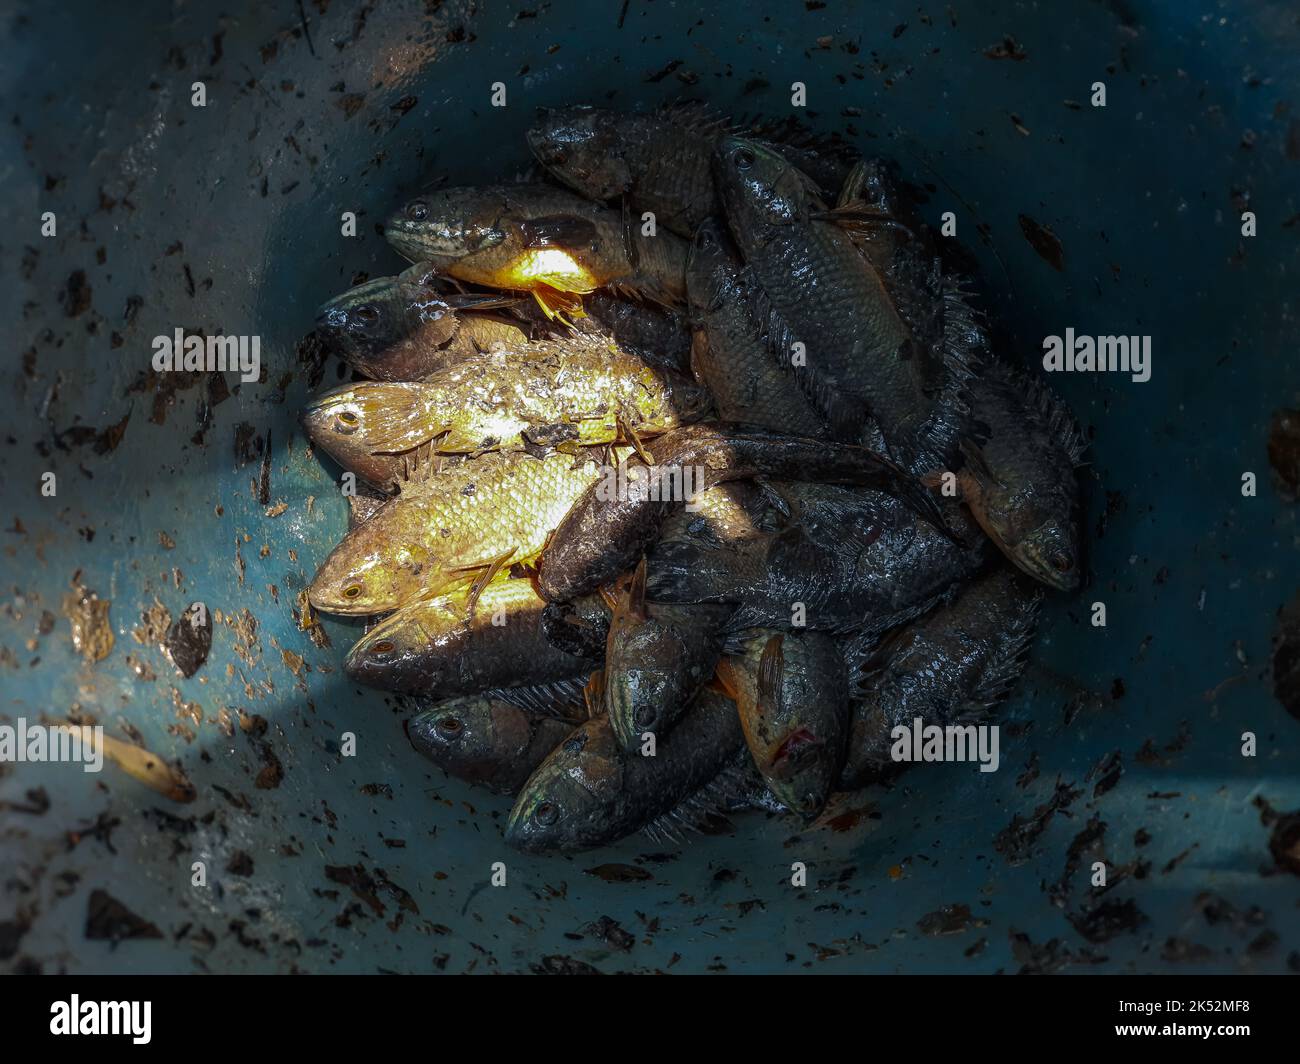 A freshwater fish with a scientific name is Anabas Testudineus. Anabas fish in the basket. Anabas fish harvested fresh and ready for cooking. Stock Photo